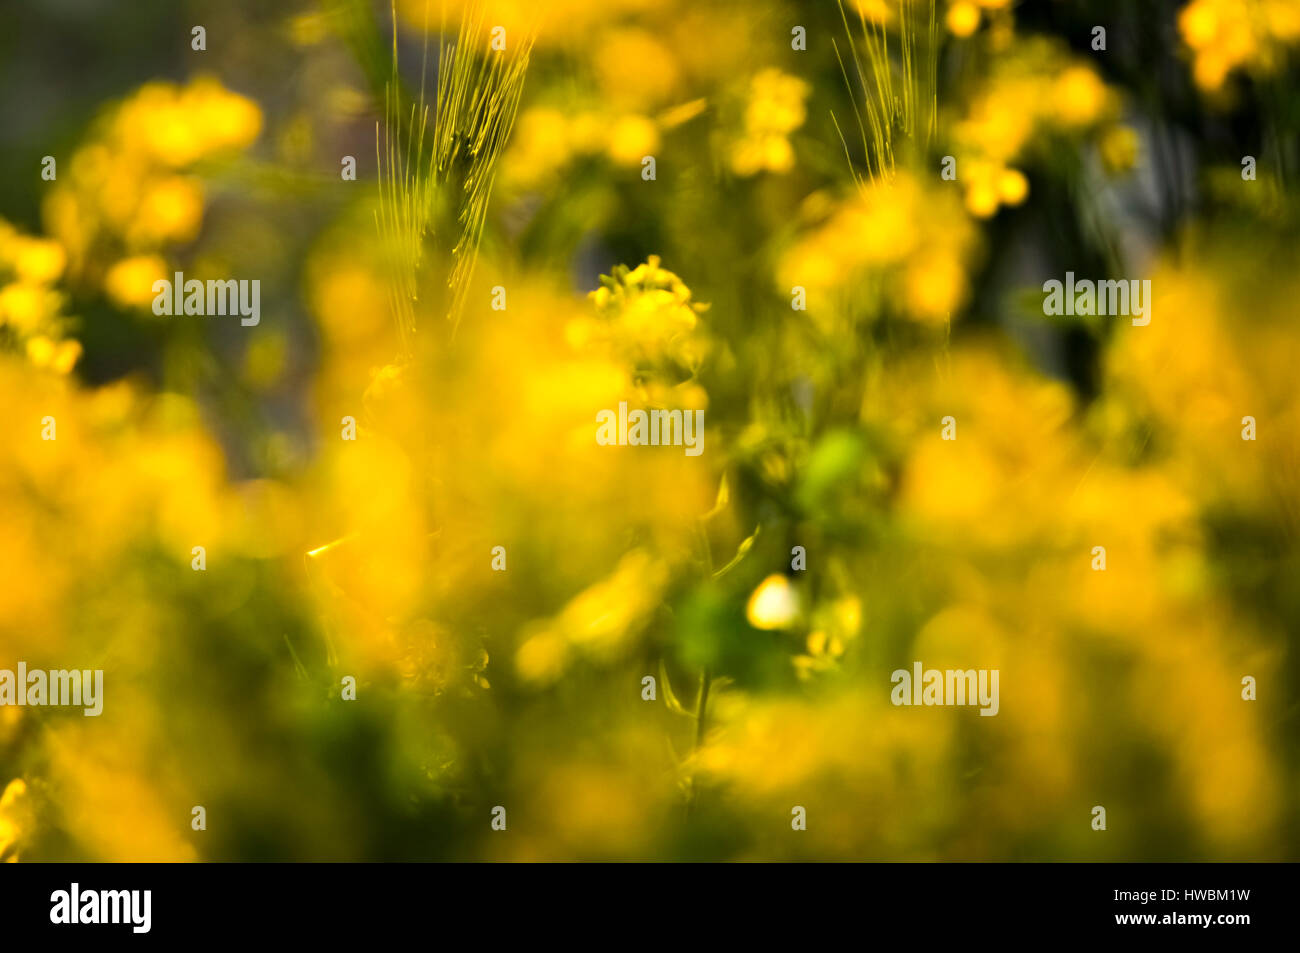 Blurry yellow and green spring flowers Stock Photo